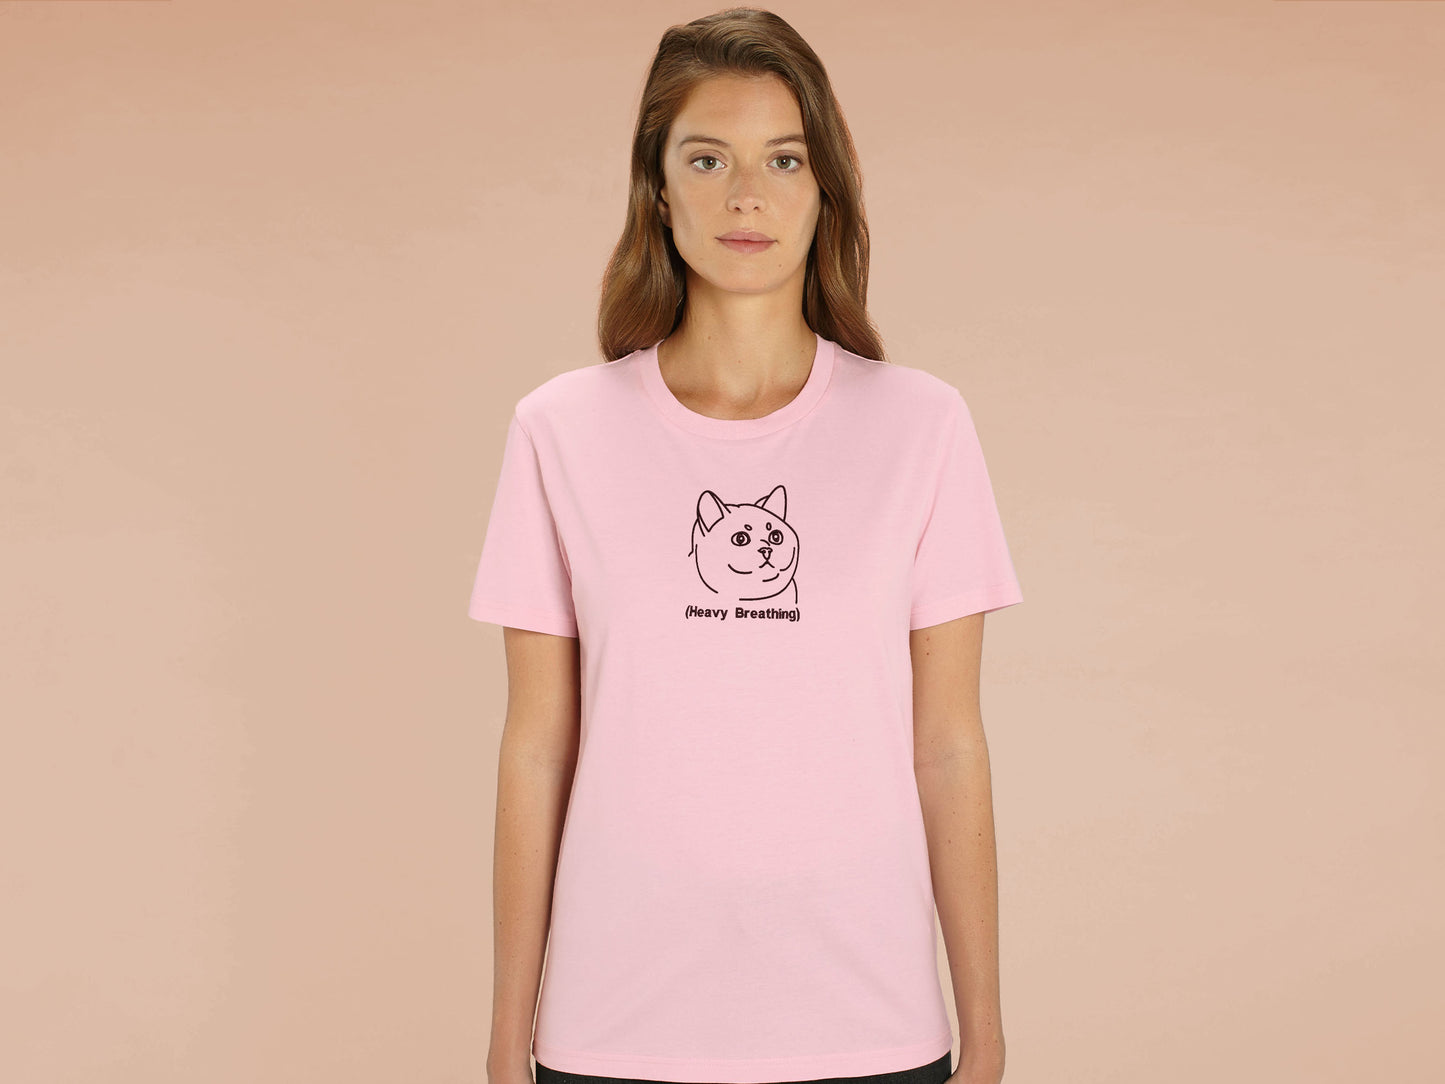 A woman wearing a pink crew neck short sleeve t-shirt, with an embroidered brown thread design of cute fat cat portrait with text underneath saying (Heavy Breathing)